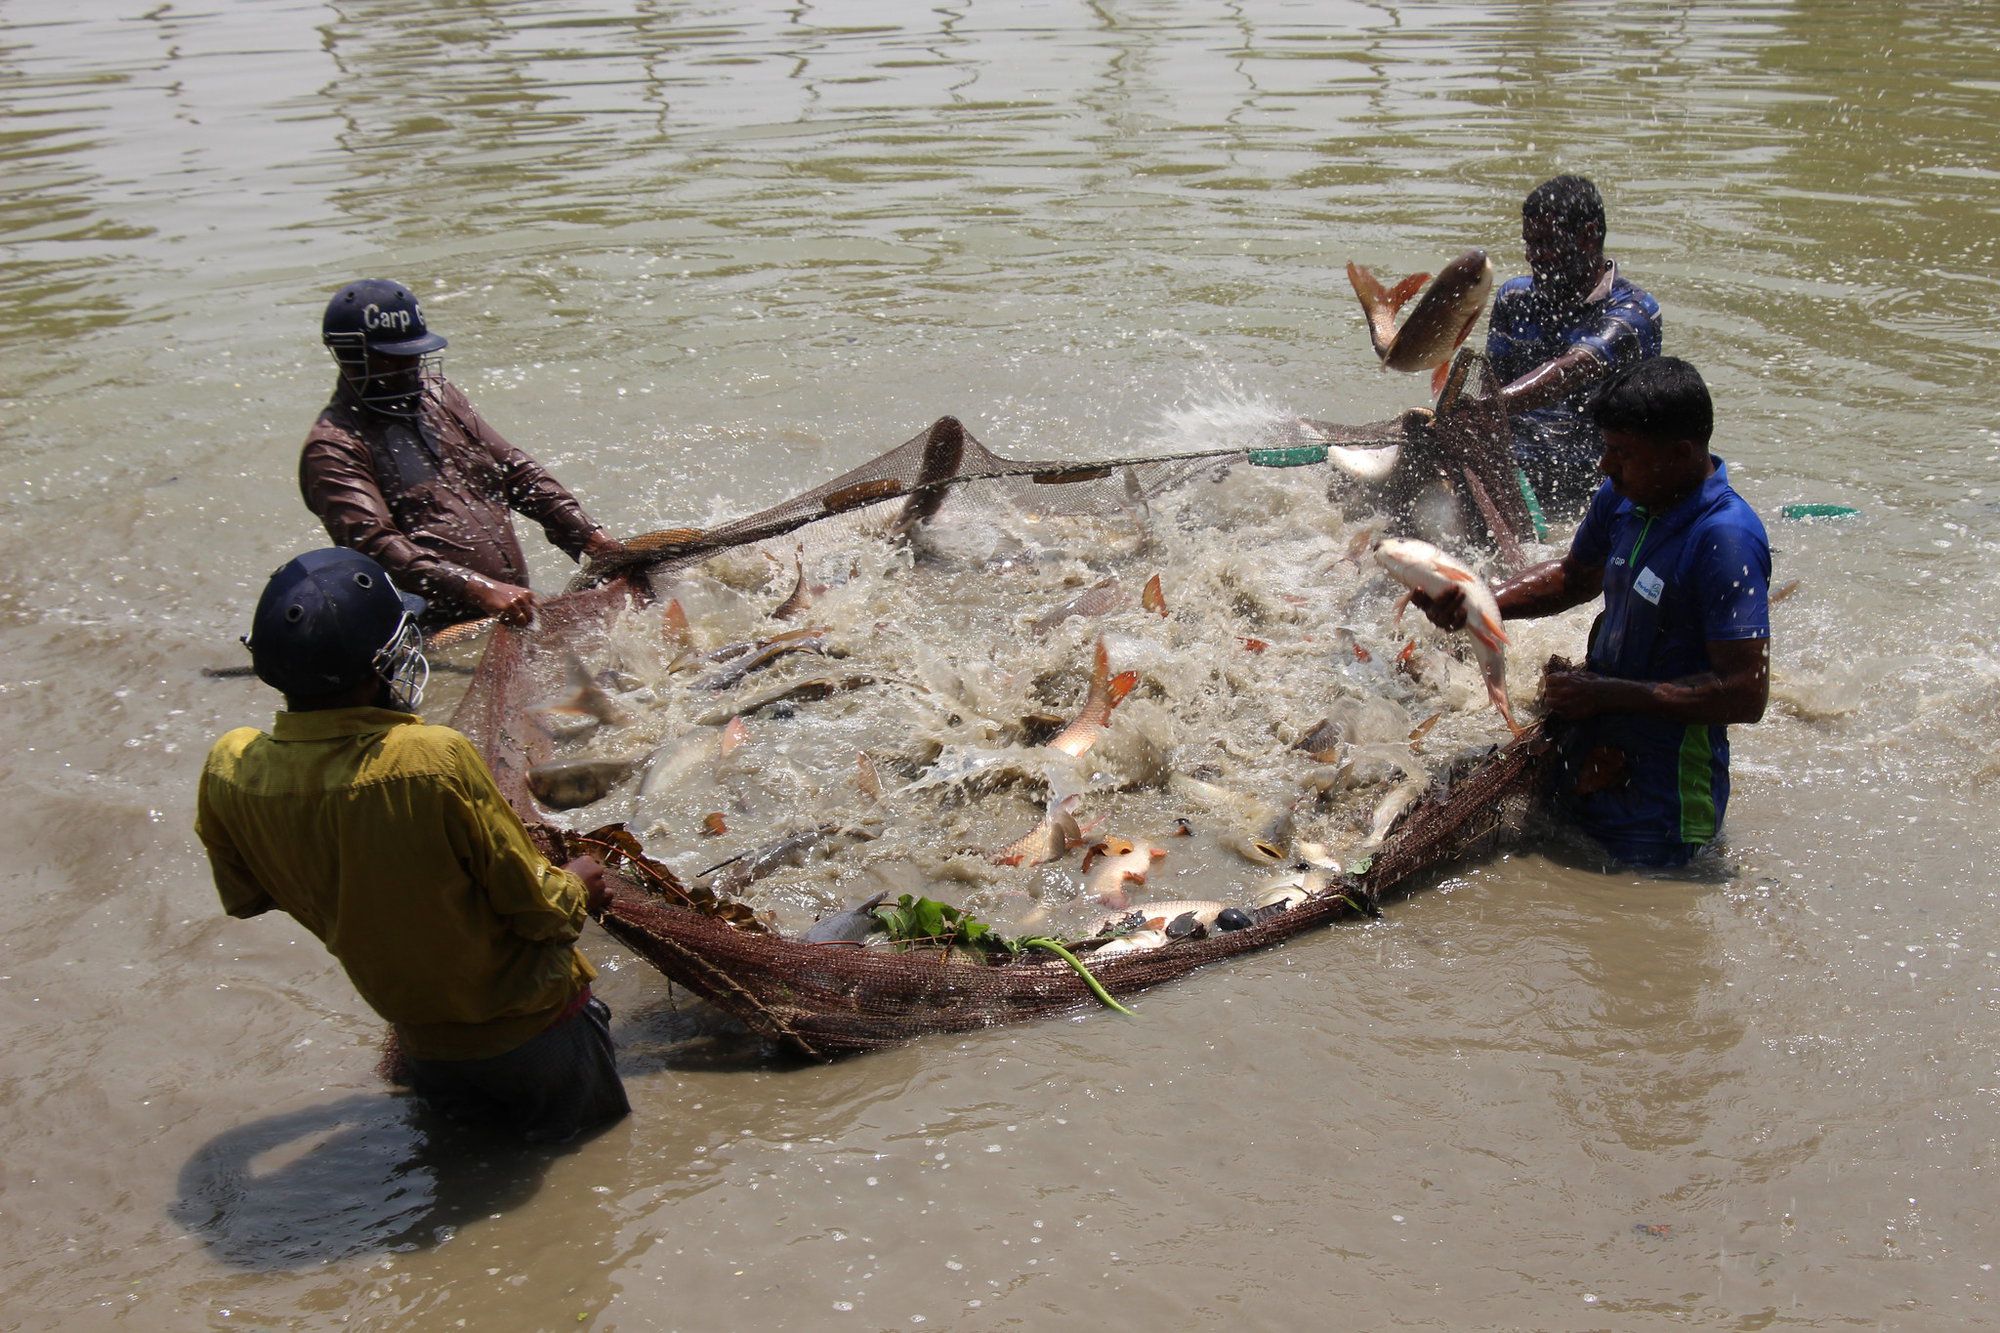 Aquatic food systems offer diverse solutions for tackling malnutrition, lowering the environmental footprint of our food systems and lifting millions of people out of poverty.